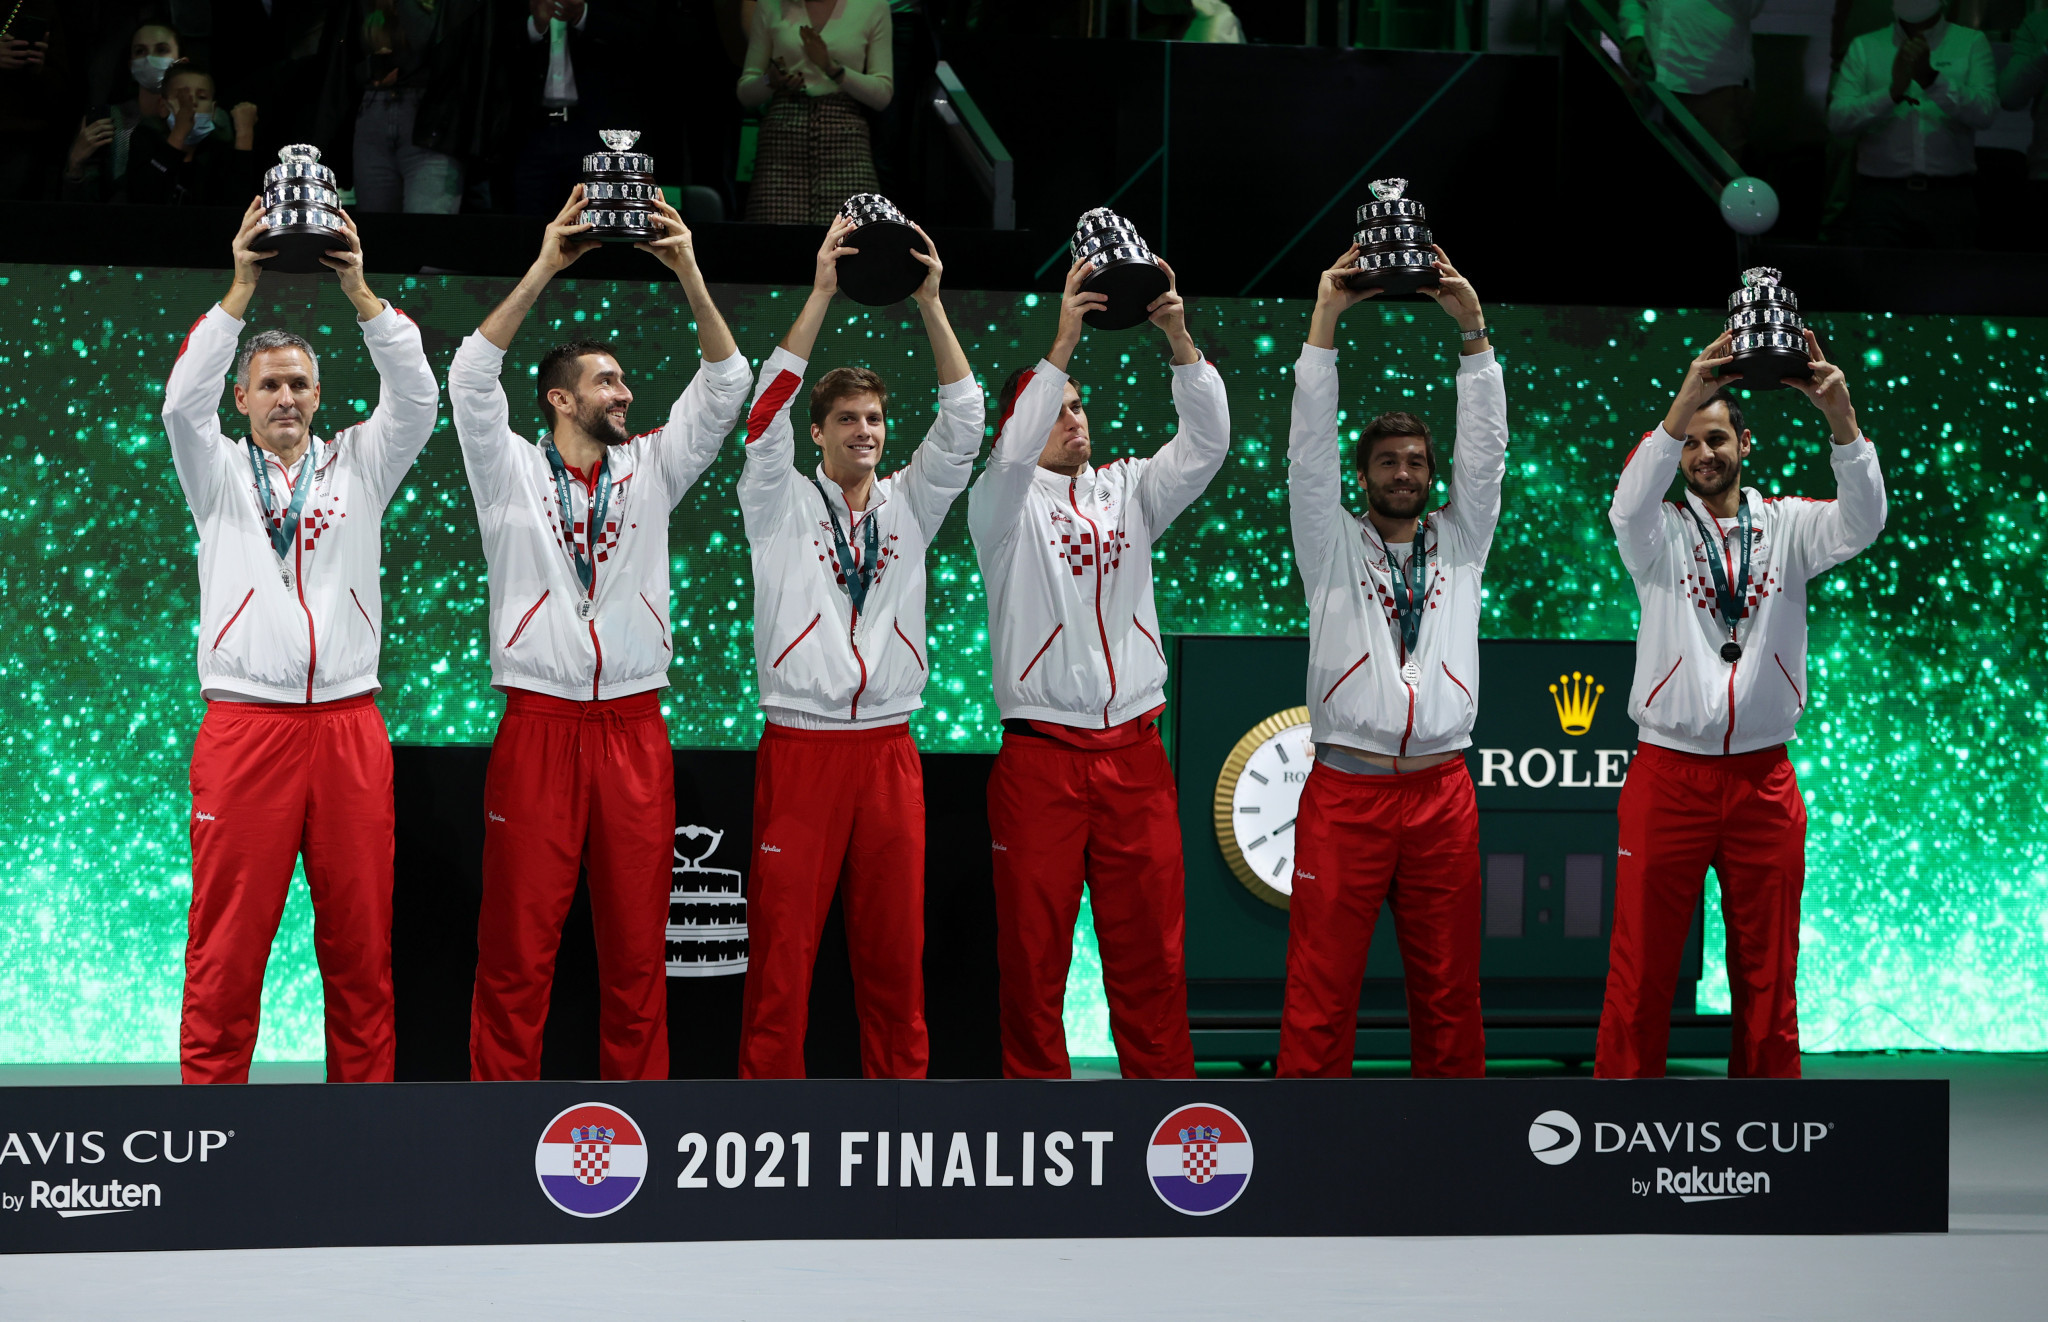 Croatia, 2021 Davis Cup Finals runners-up, were beaten in their first match against Italy ©Getty Images